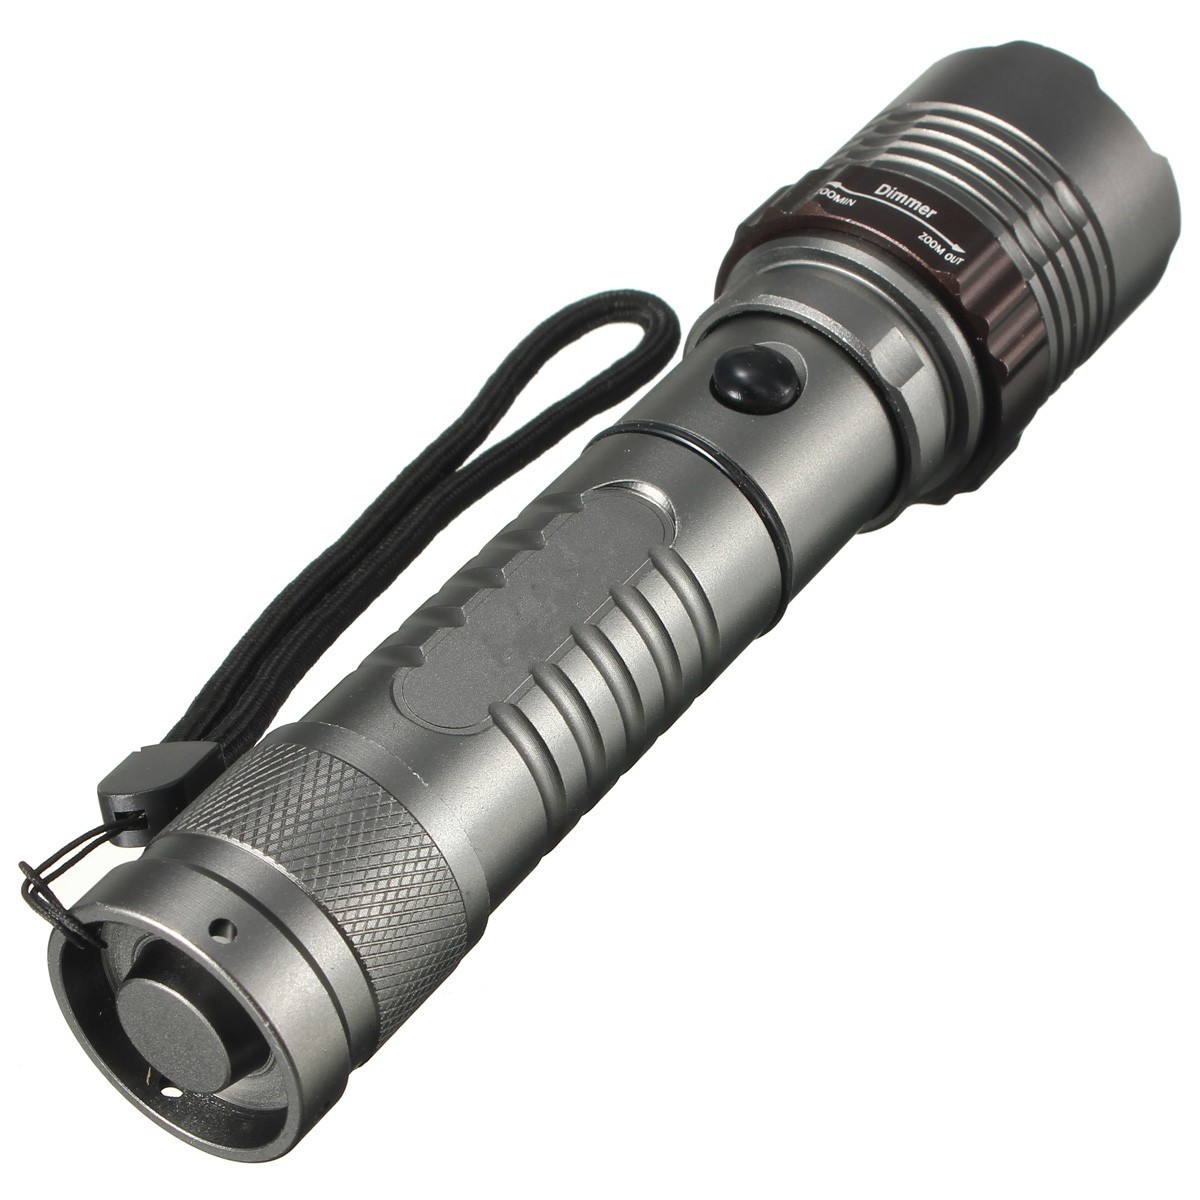 2600LM-T6-LED-Flashlight-Zoomable-5Modes-18650-Torch-Super-Bright-Torch-Lamp-For-Camping-Hiking-Cycl-1934827-9